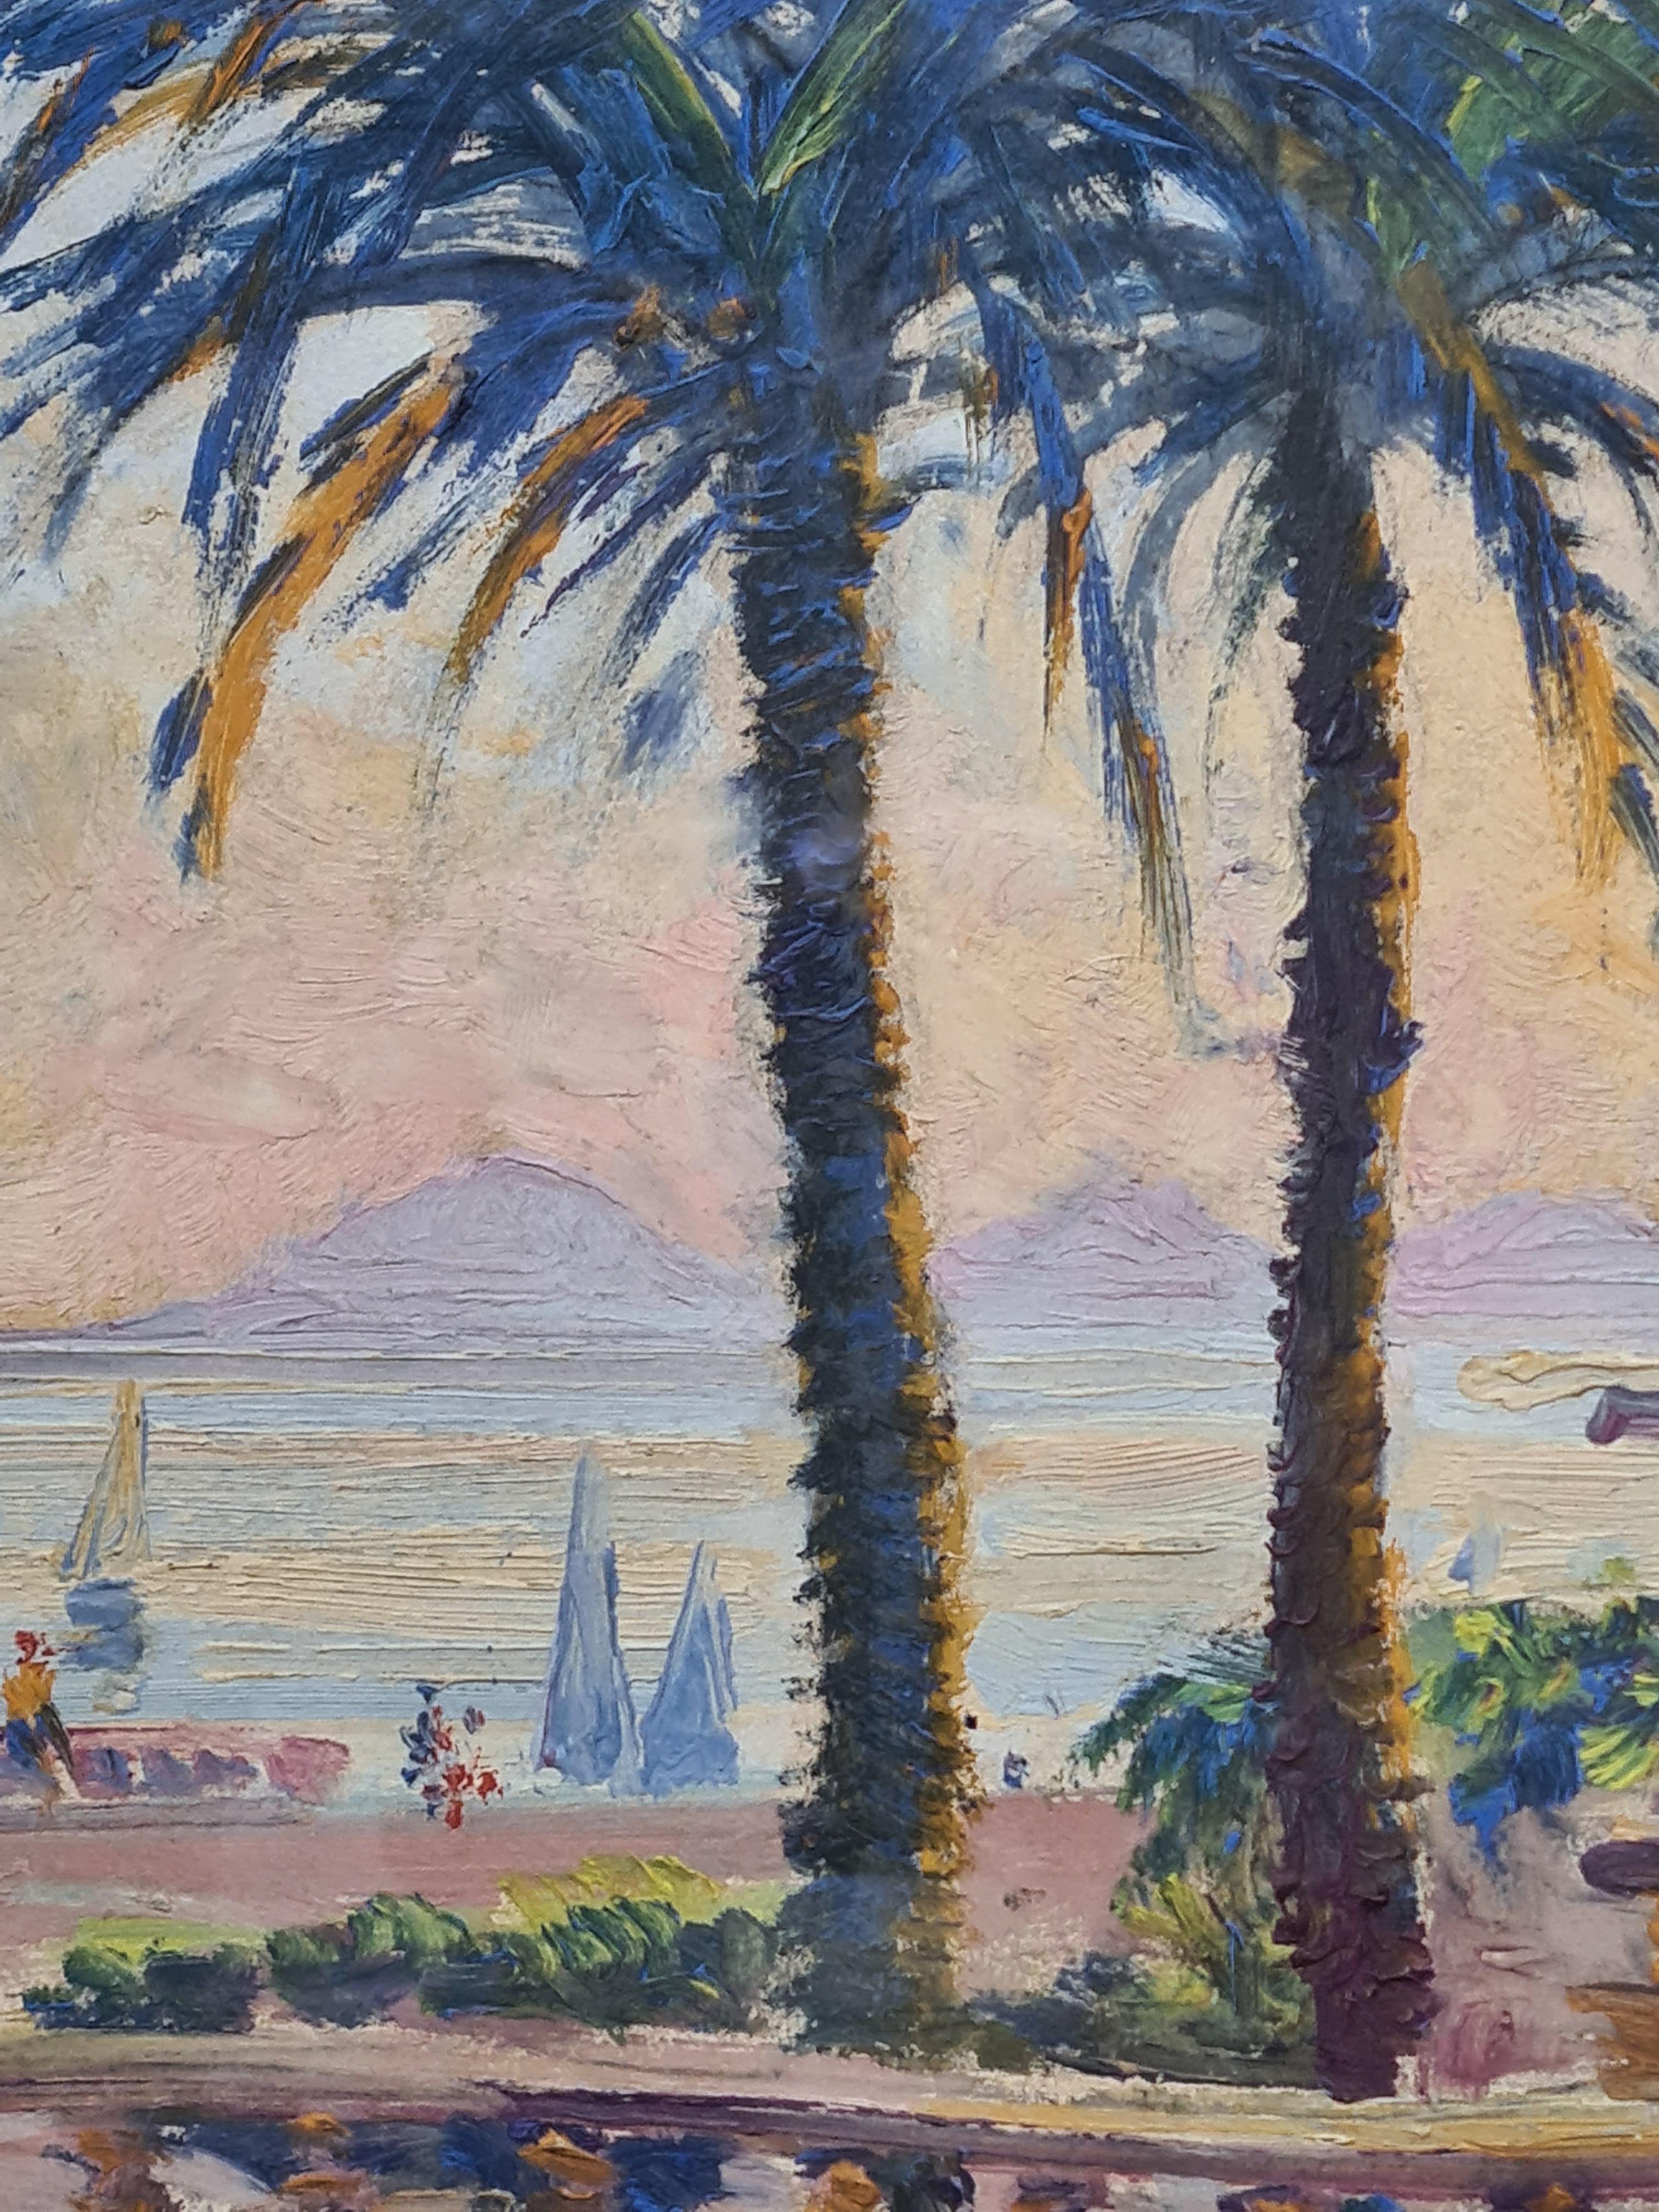 A mid century oil on board view of the seafront at Cannes in the South of France by Robert Auguste Jaeger also known as Le Veneur. Signed 'Le Veneur' bottom right presented in modern wood frame under glass.

A charming painting of the view of the